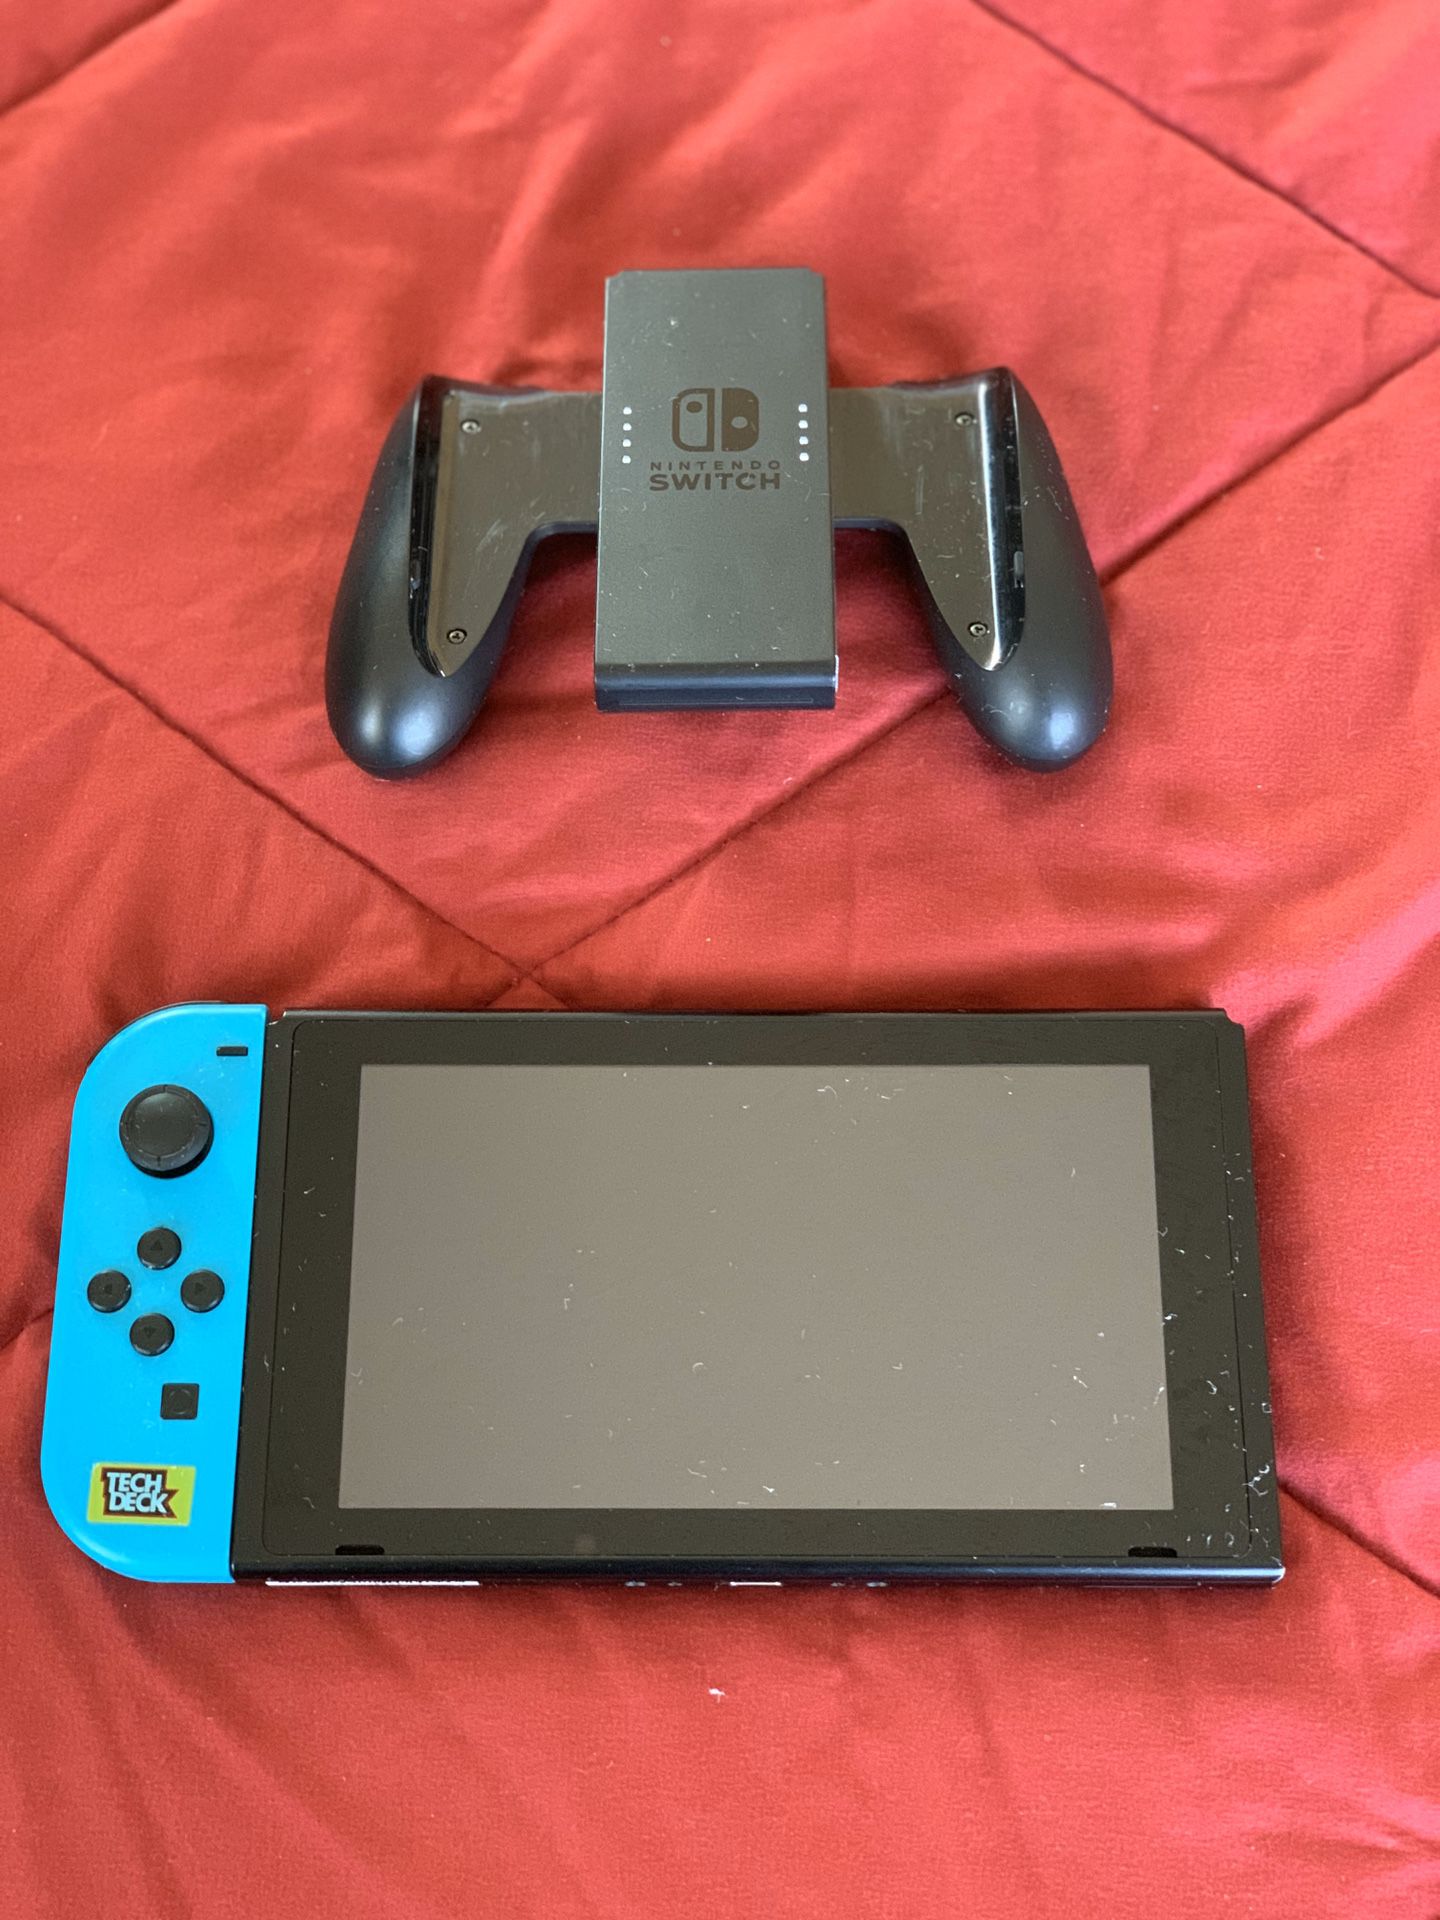 Nintendo Switch (Missing the red side)